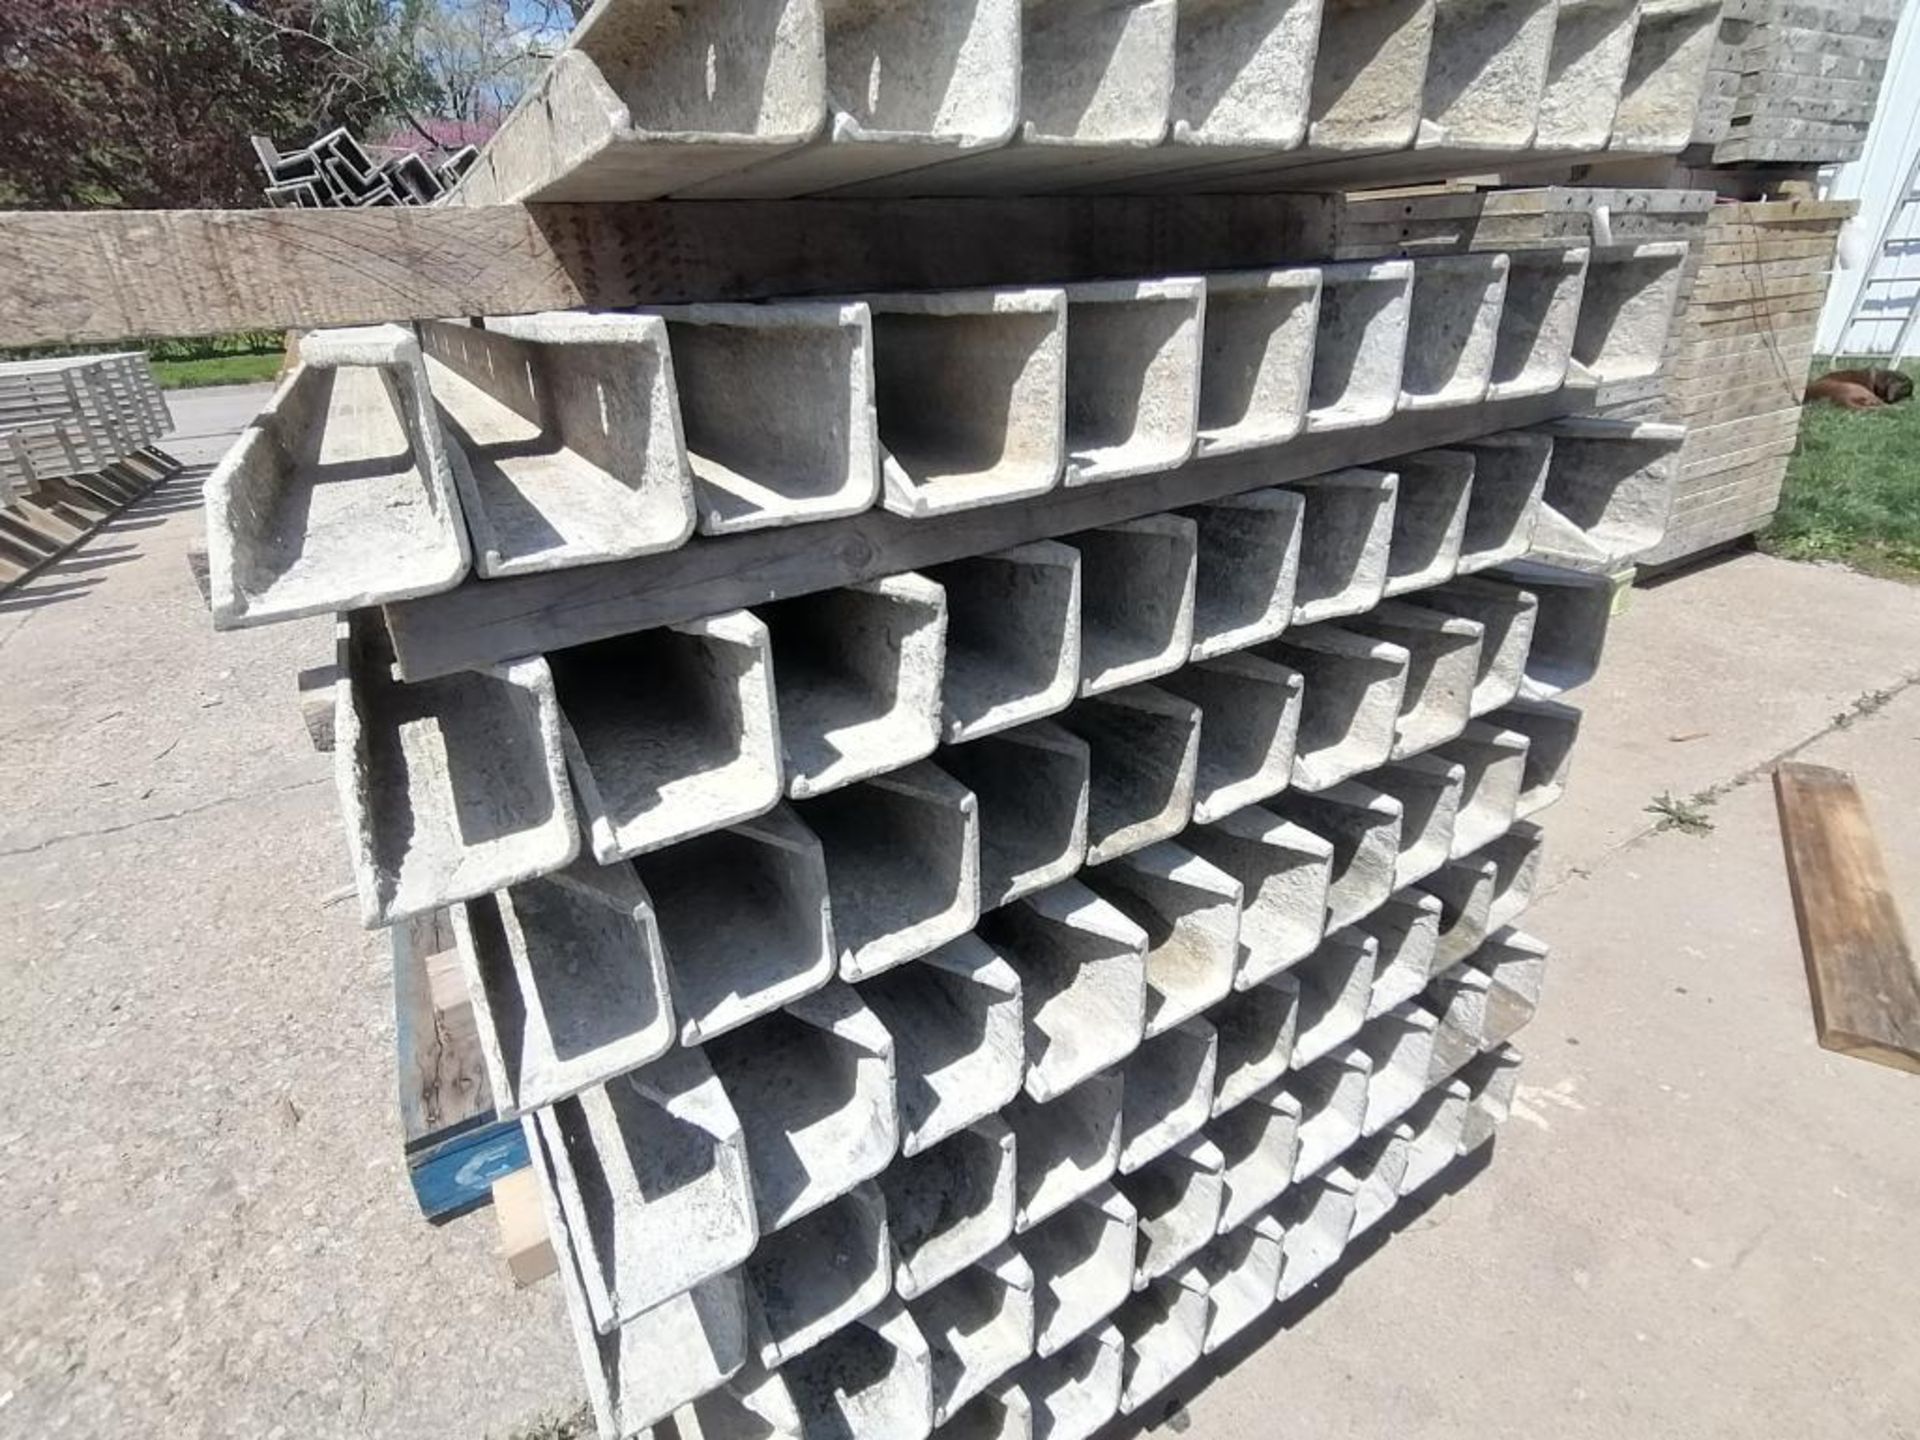 (10) 4" x 4" x 8' Full ISC Wall-Ties Smooth Aluminum Concrete Forms 6-12 Hole Pattern. Located in